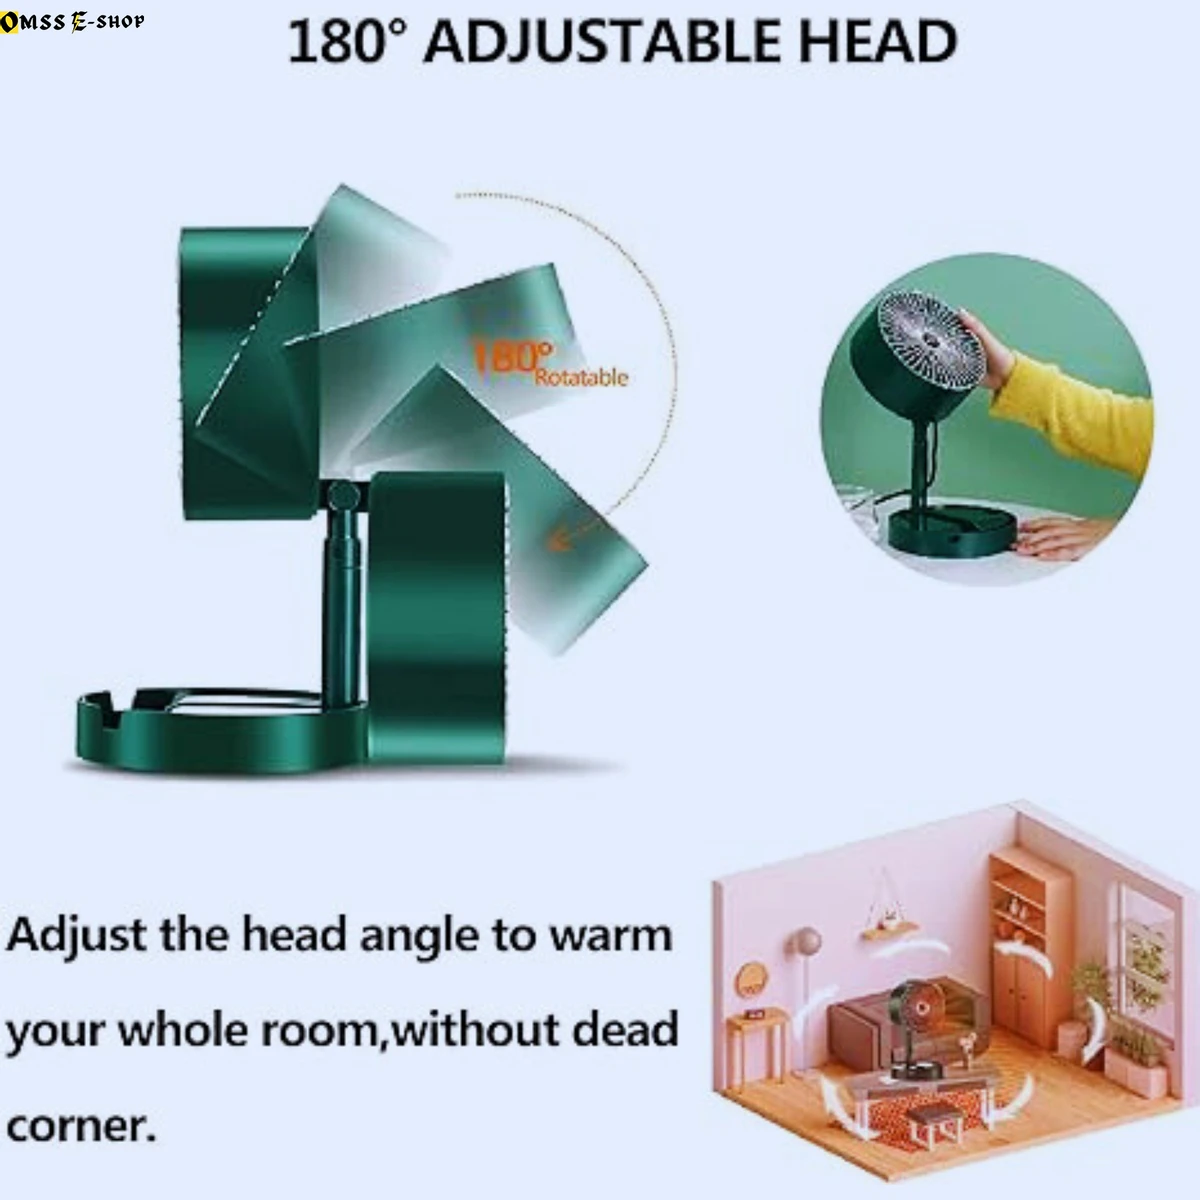 Foldable and Height Adjustable 180° Wide Angle Room Heater for Home-Office, Indoor Portable Fan Heater's Low Energy Silent